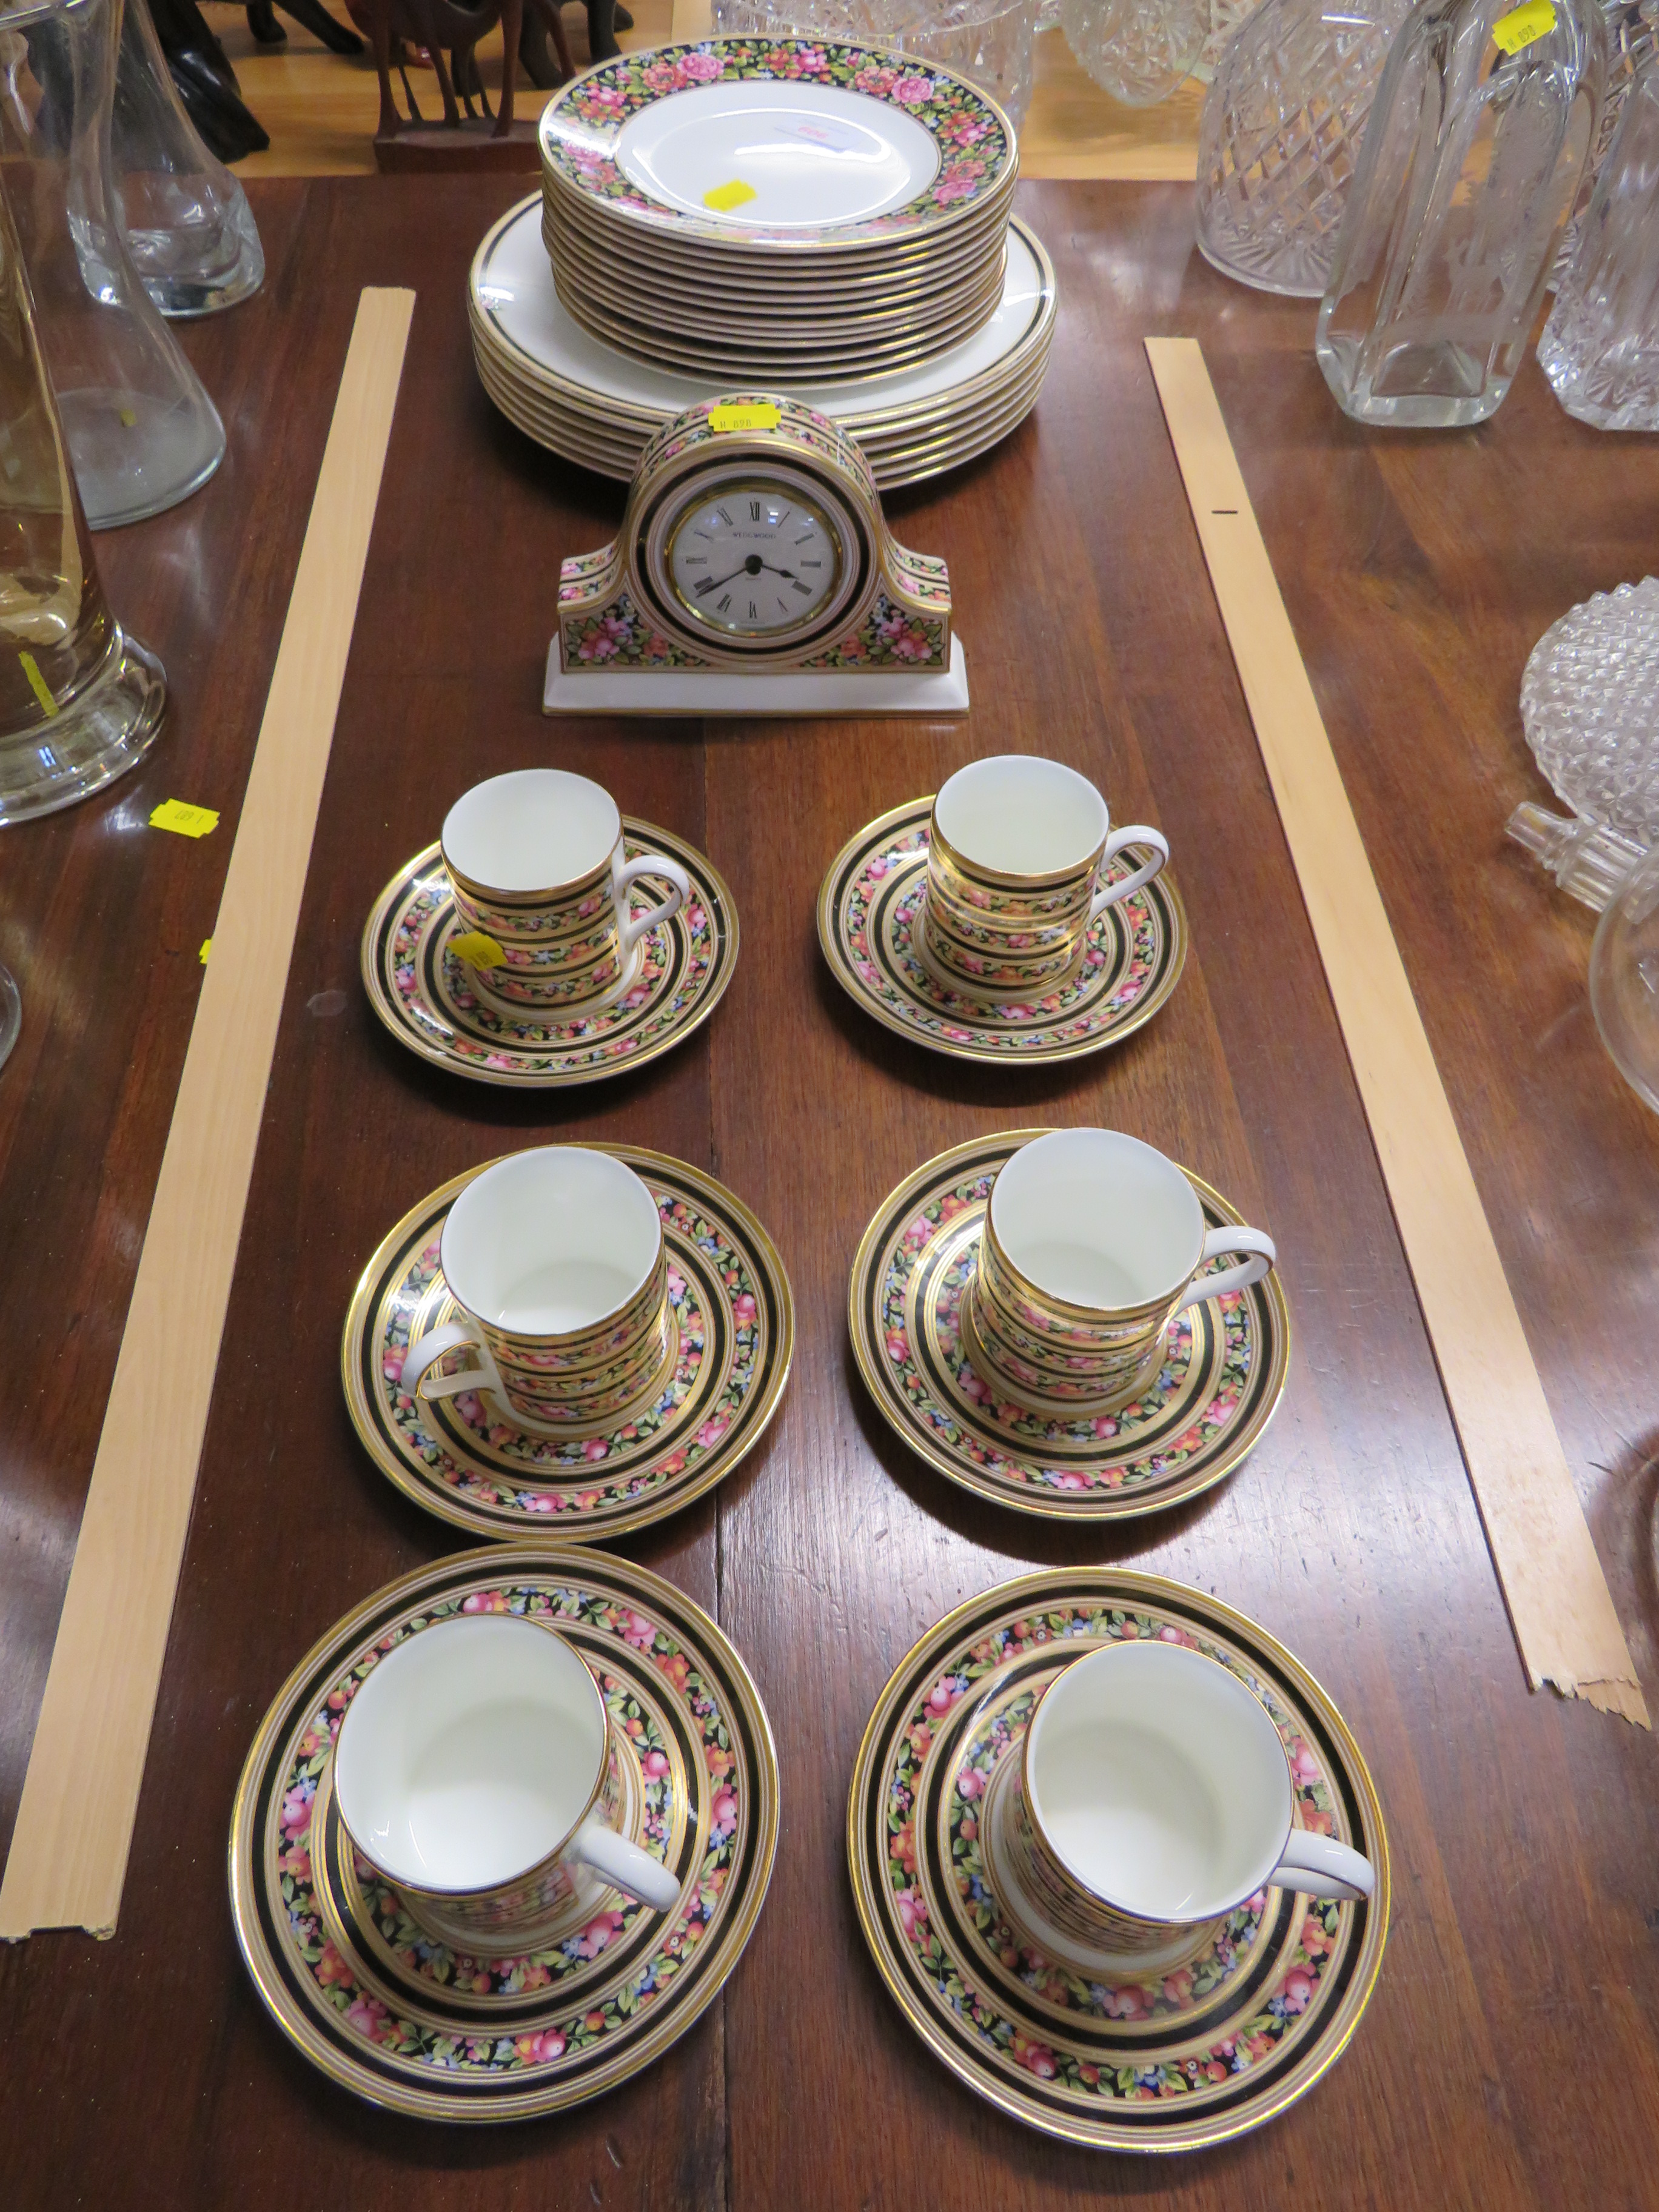 WEDGWOOD 'CLIO' MANTLE CLOCK, DINNER PLATES, SIDE PLATES AND SIX COFFEE CUPS AND SAUCERS